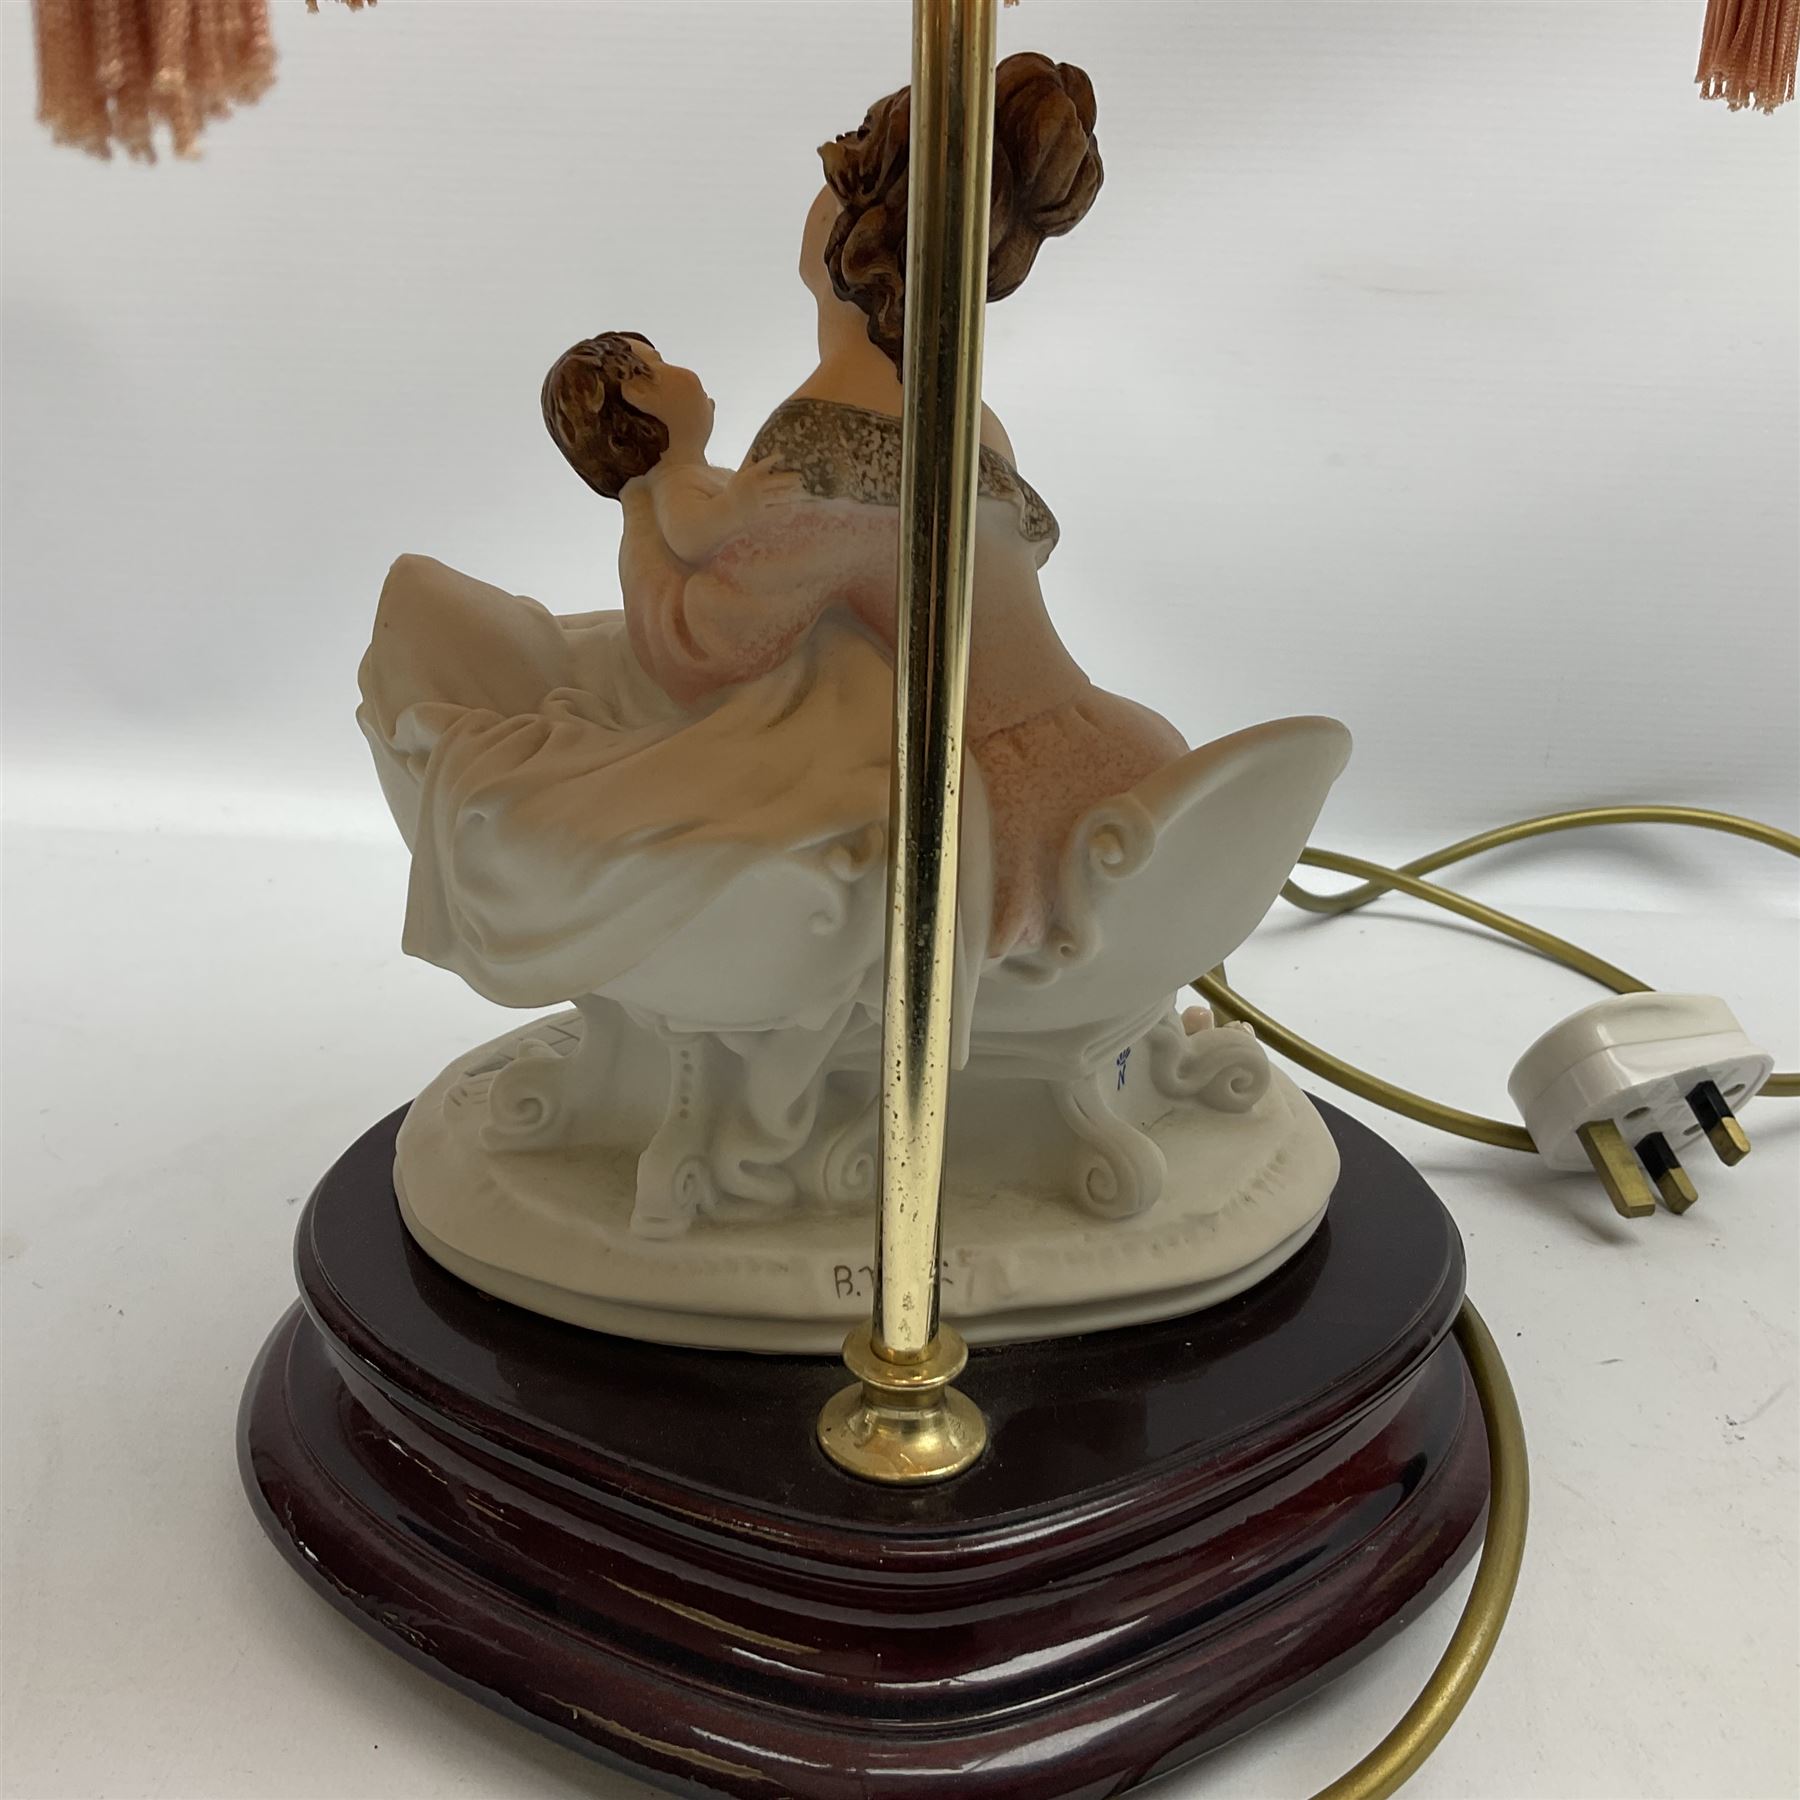 Capodimonte figural table lamp modeled as a woman and baby - Image 6 of 7